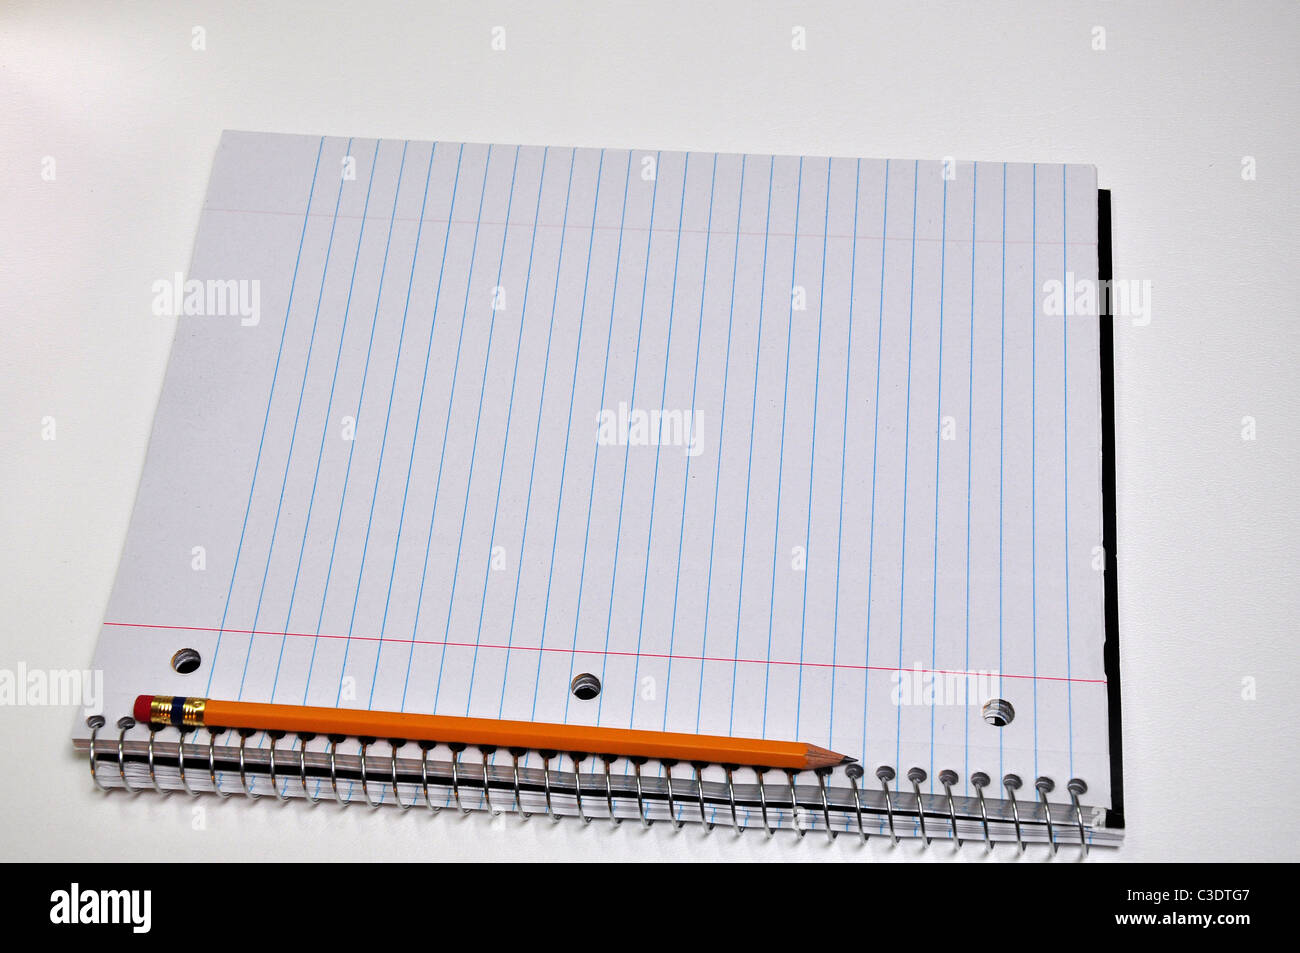 A standard size notebook with a pencil is sitting on a white background Stock Photo